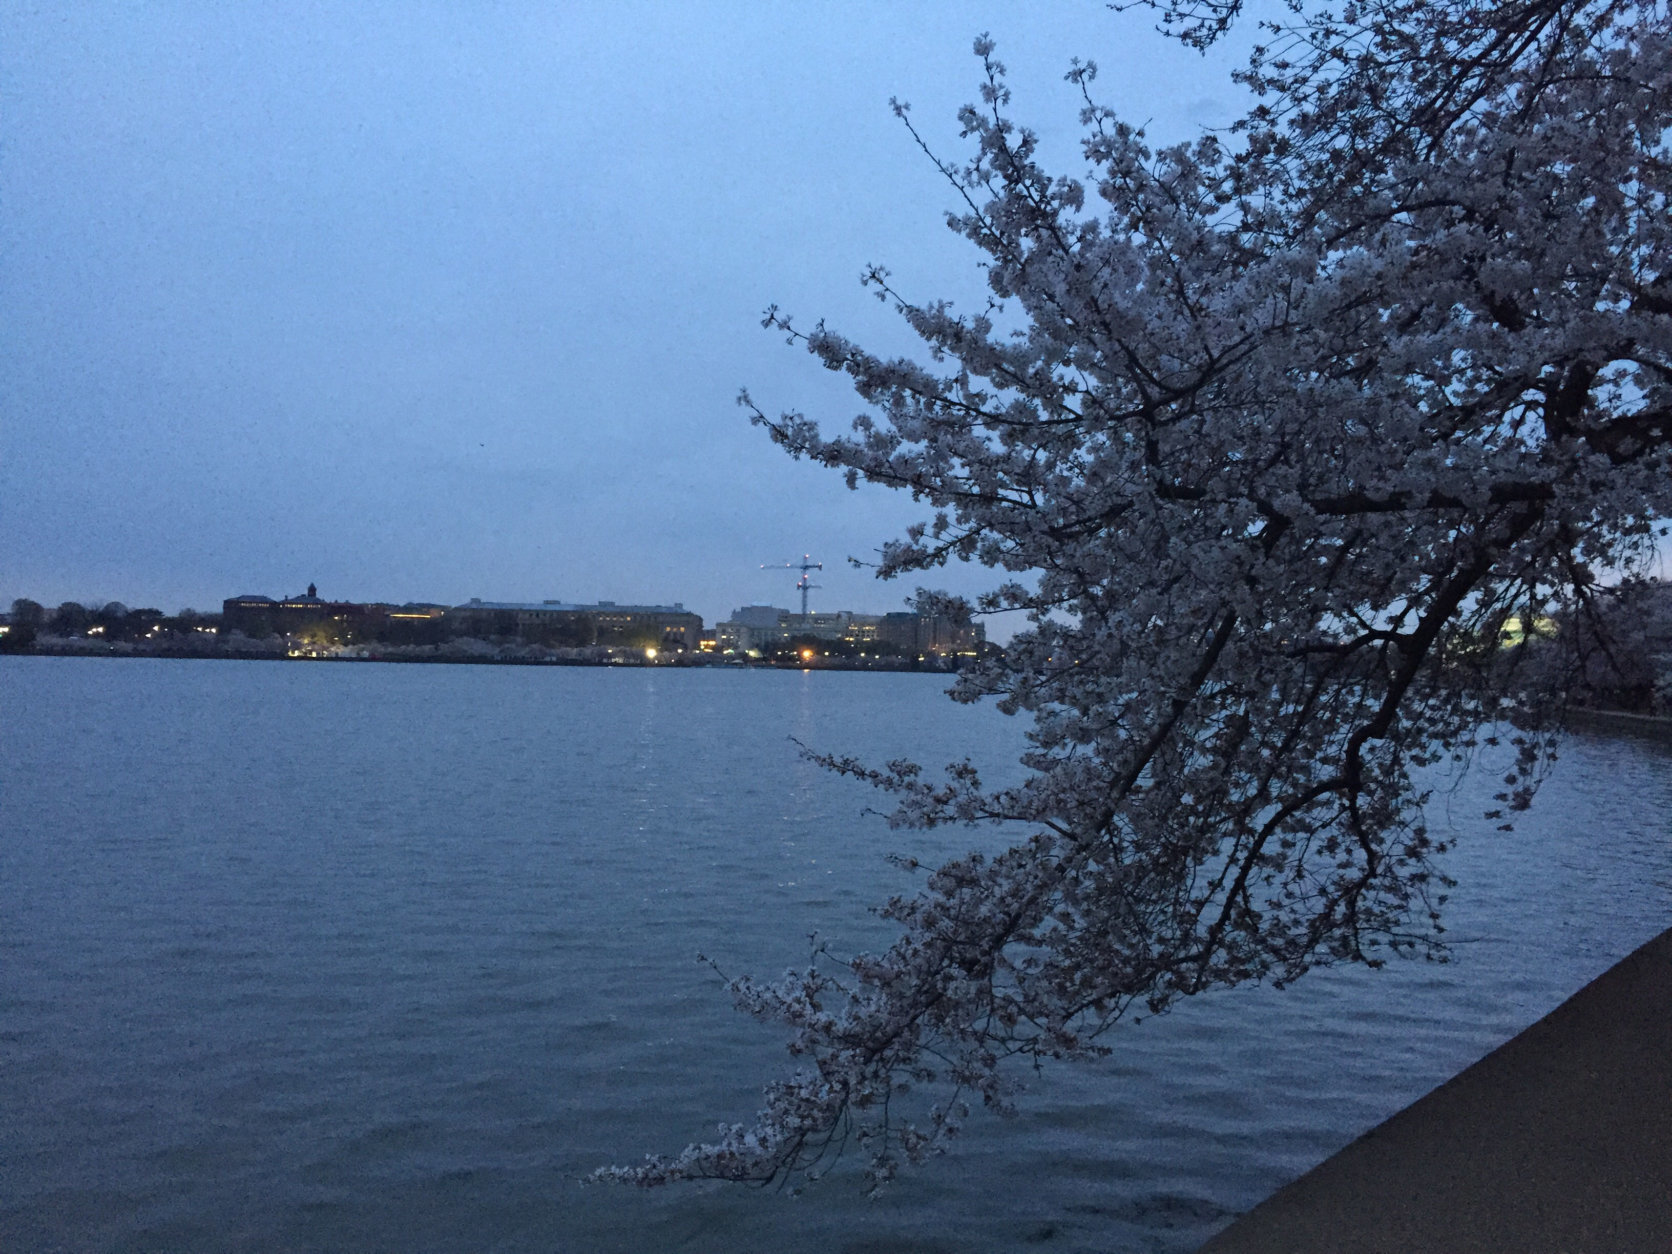 Cherry blossoms in the early morning hours of April 6, 2018. (WTOP/John Domen)